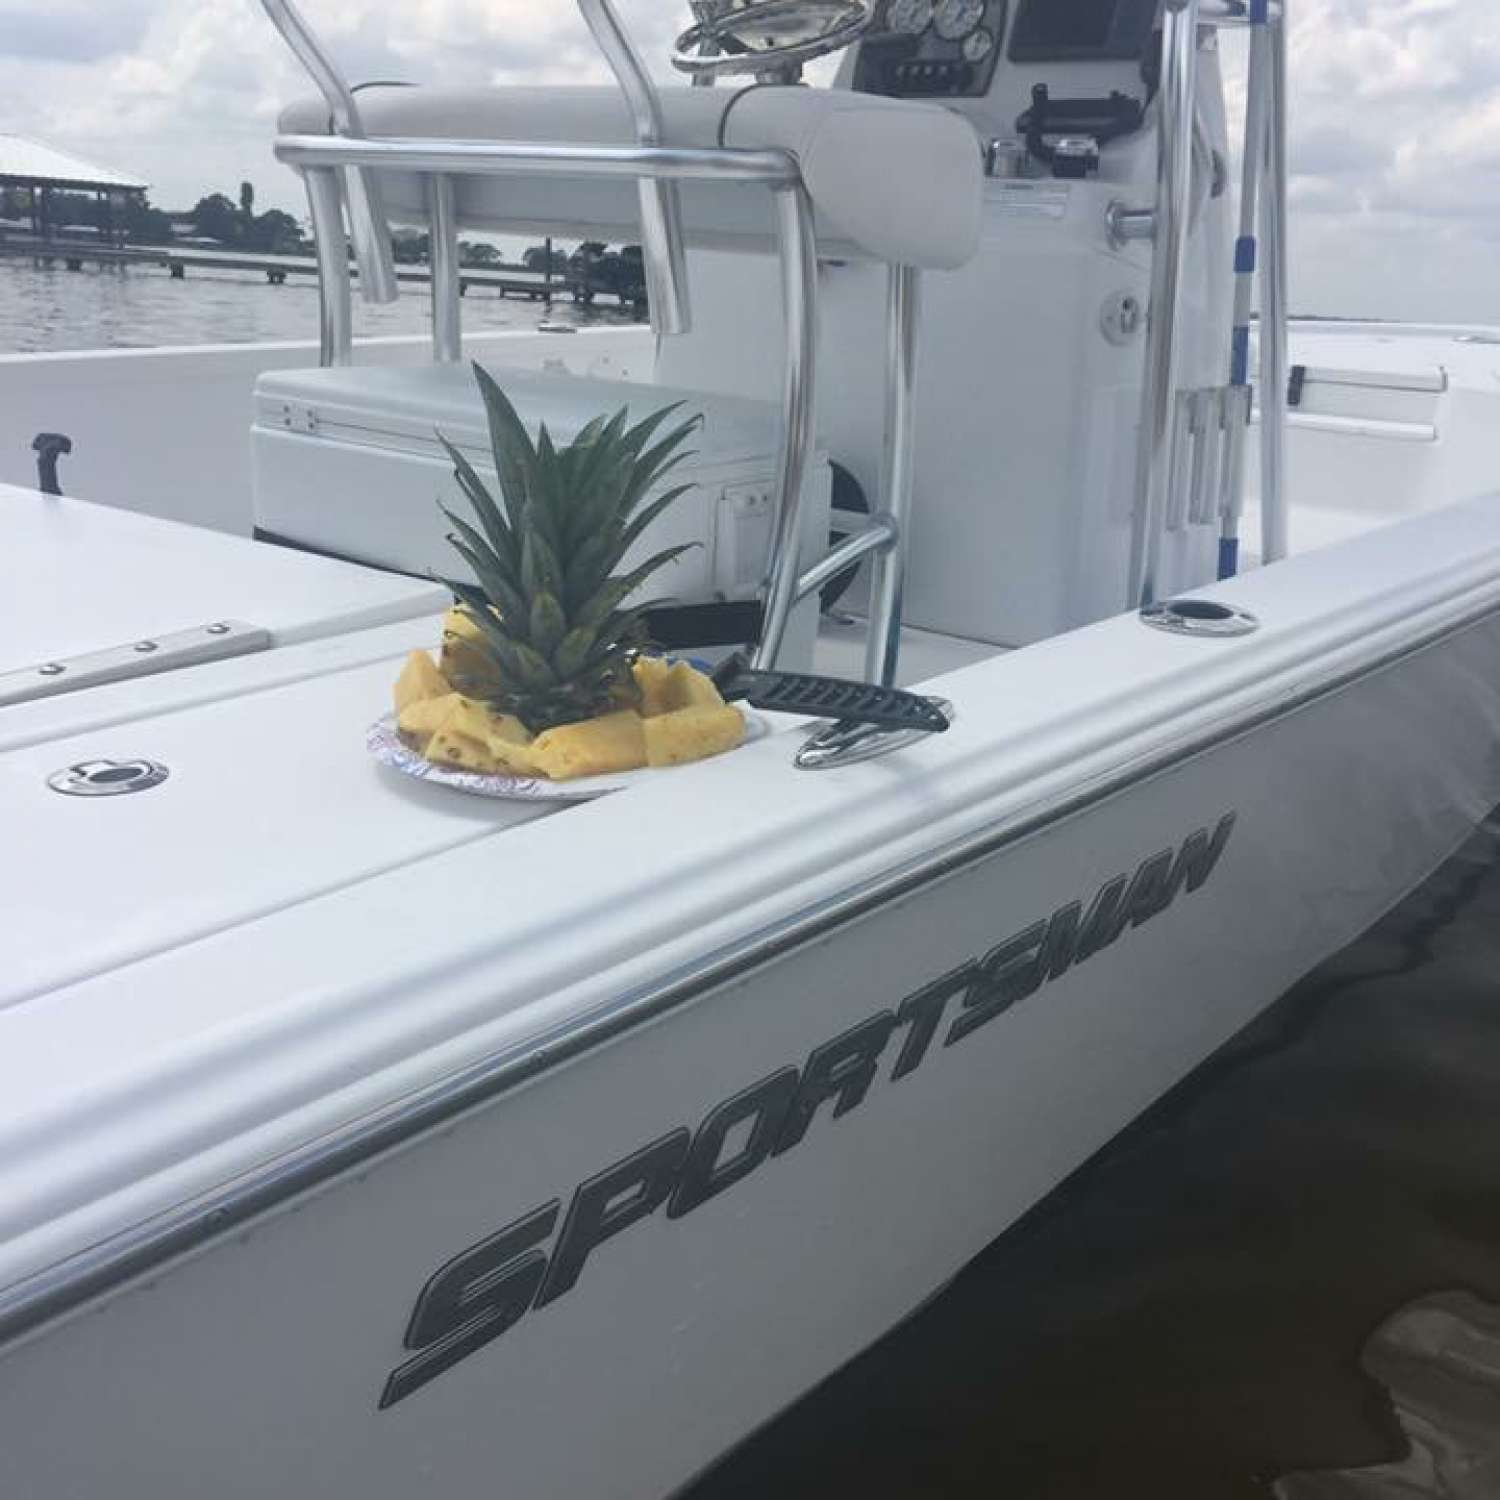 My photo was taken on Lake Placid in Lake Placid, FL over spring break.  My Sportsman bay boat is perfect...